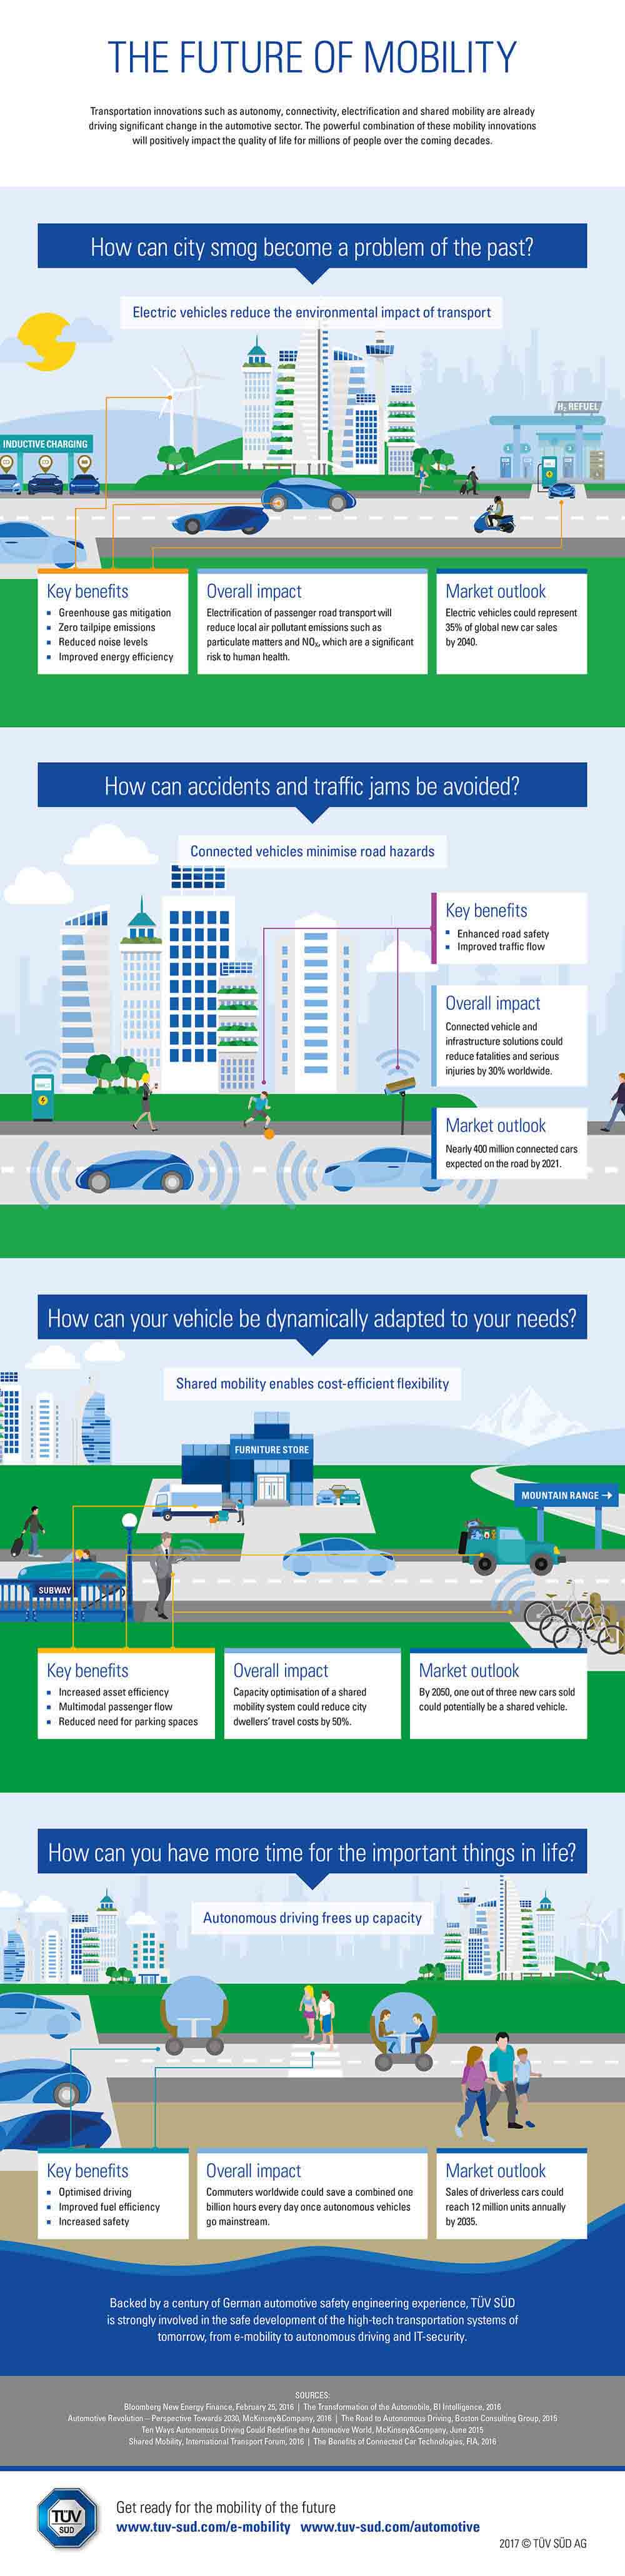 Infographic on the future of mobility